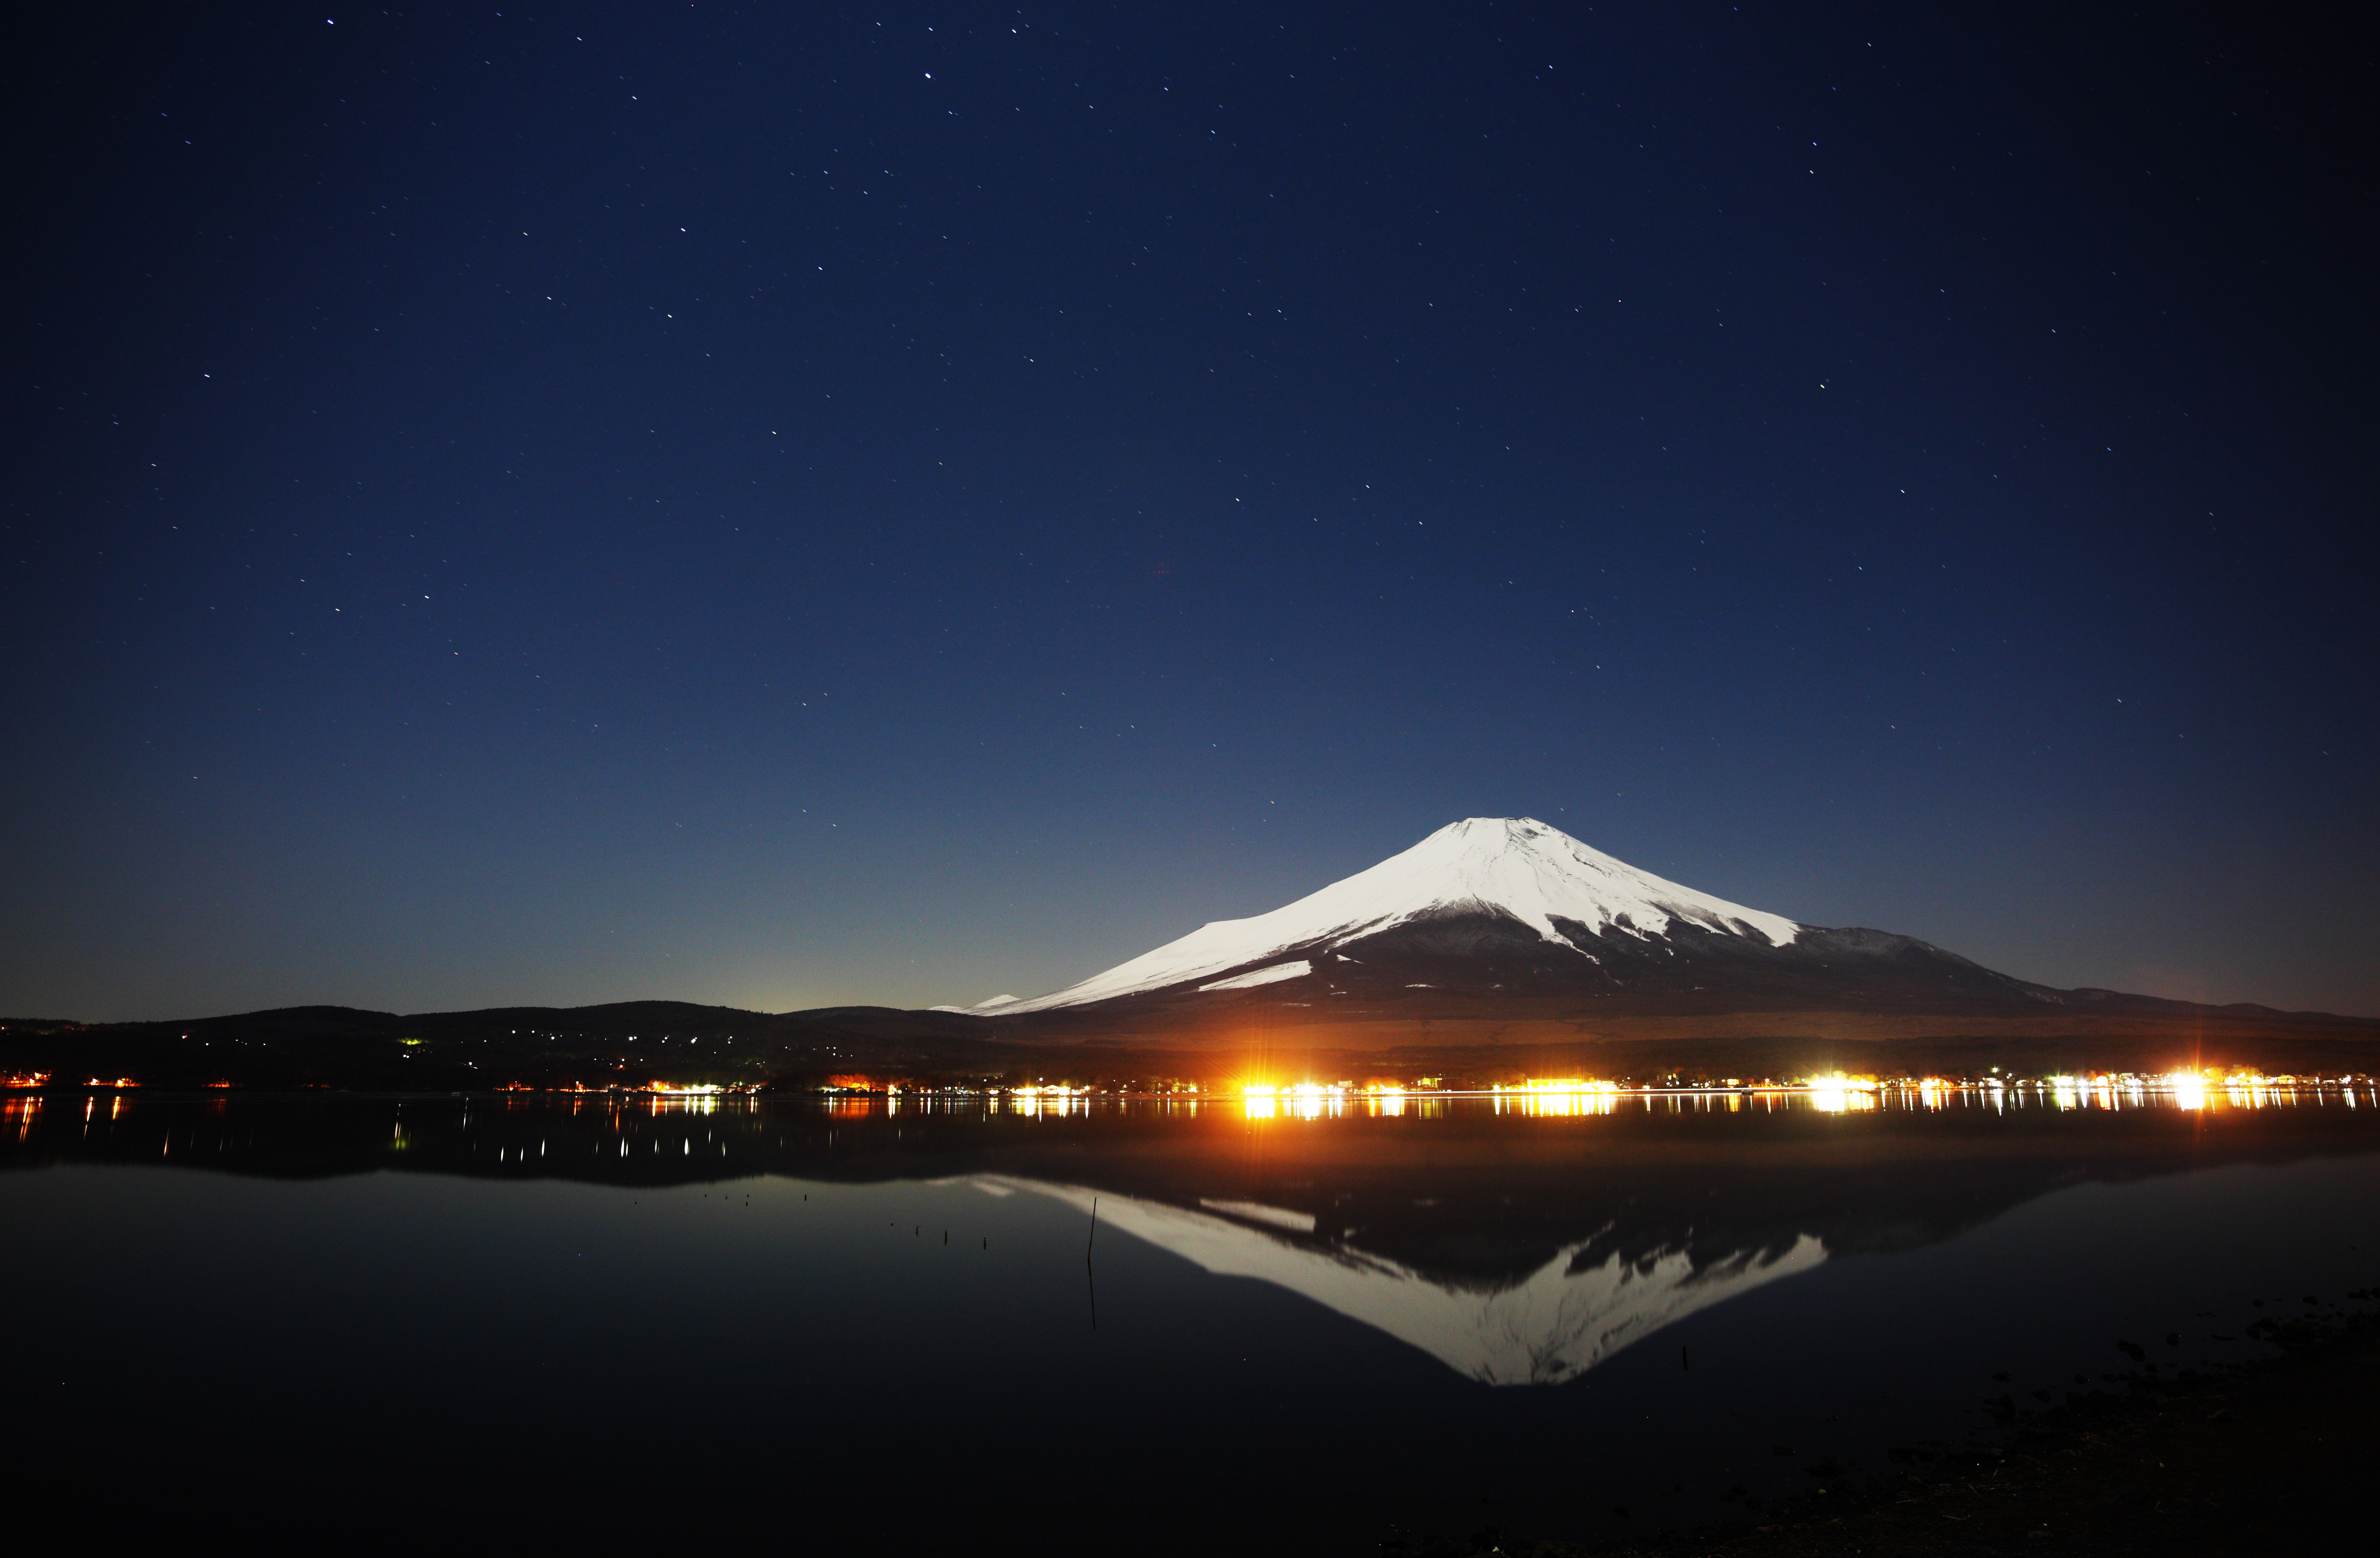 photo,material,free,landscape,picture,stock photo,Creative Commons,Mt. Fuji, Fujiyama, The snowy mountains, surface of a lake, Starlit sky